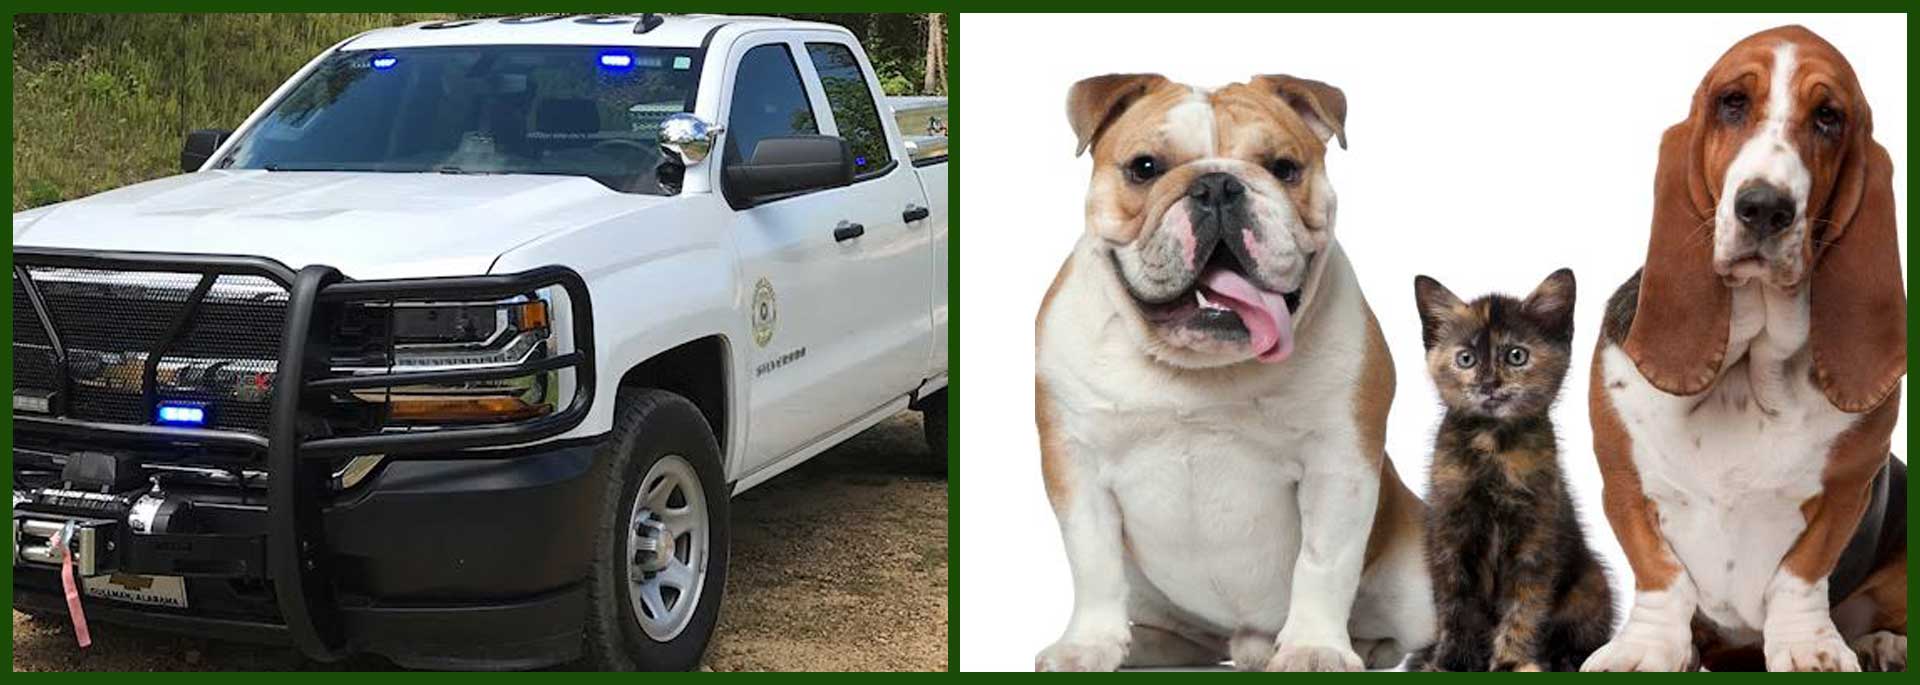 Animal Control truck and two dogs and a kitten